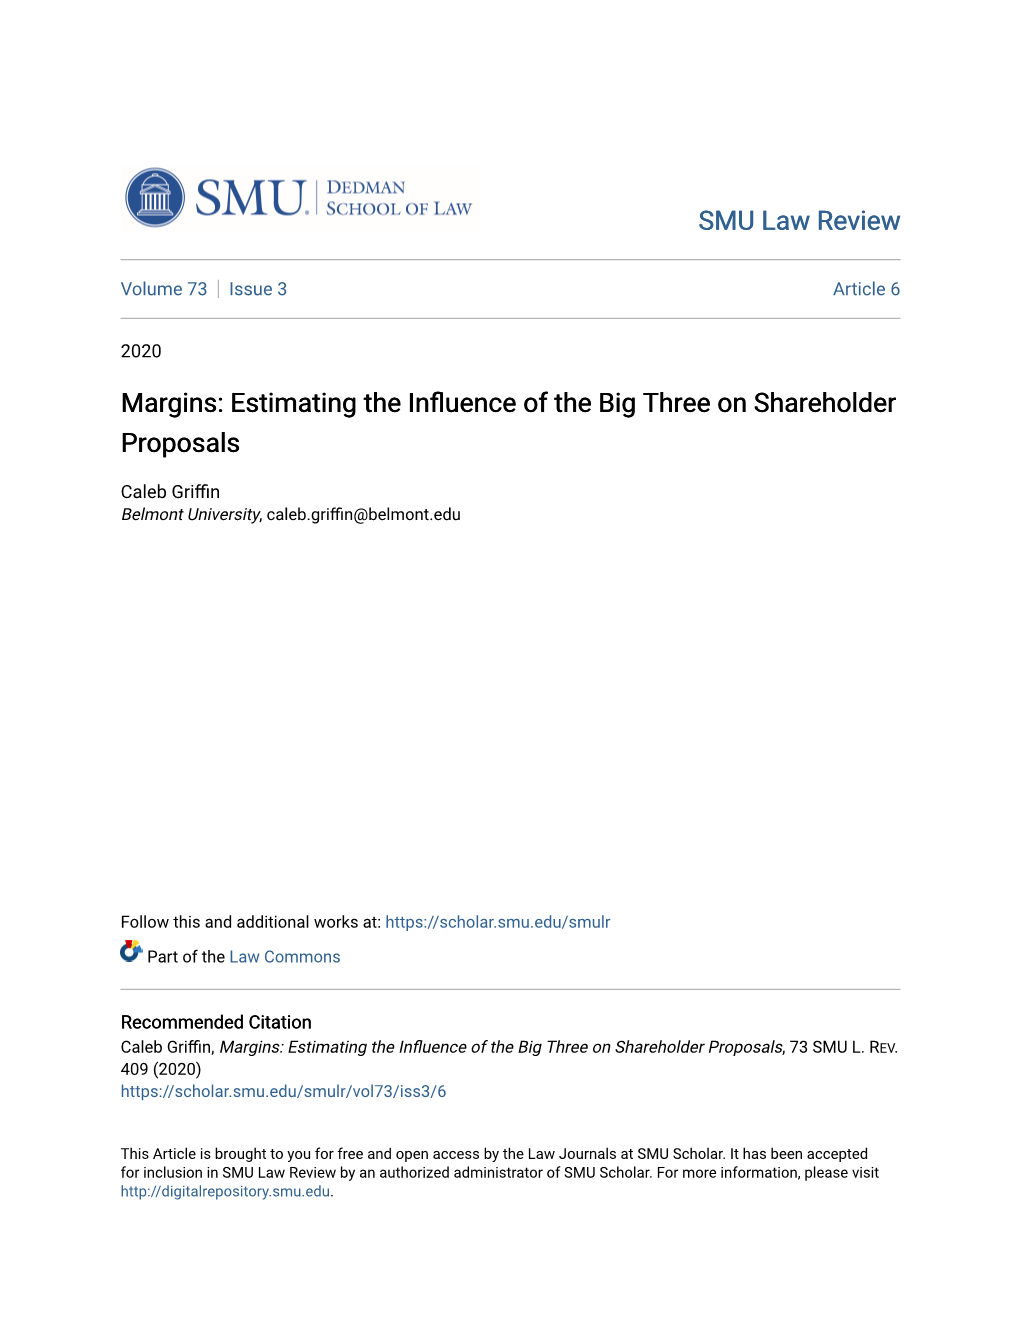 Estimating the Influence of the Big Three on Shareholder Proposals